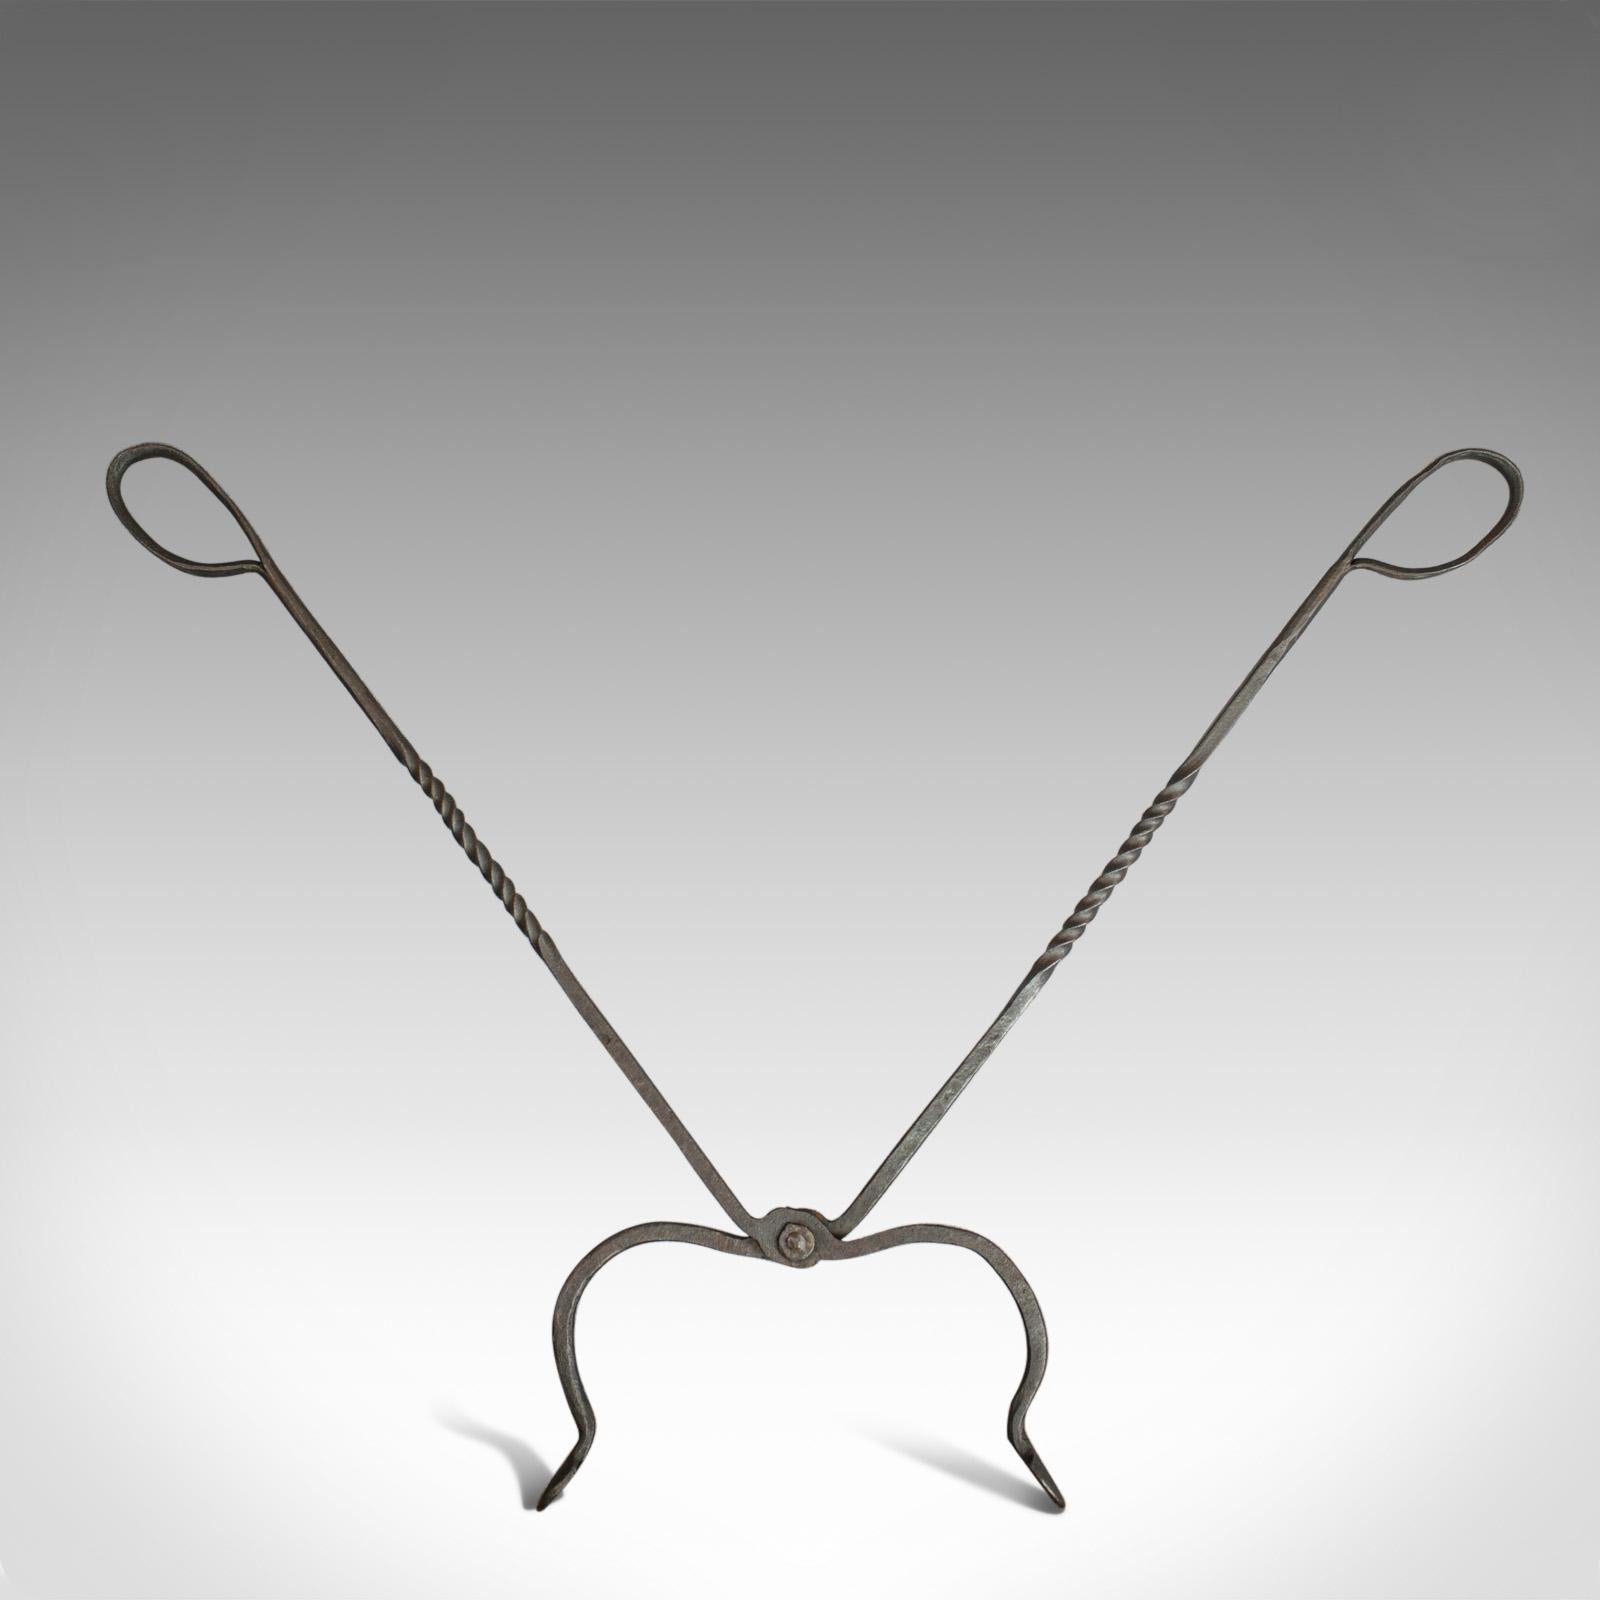 Iron Antique Pair of Large Fire Tongs, Georgian, Hand Forged, Stirrup, circa 1800